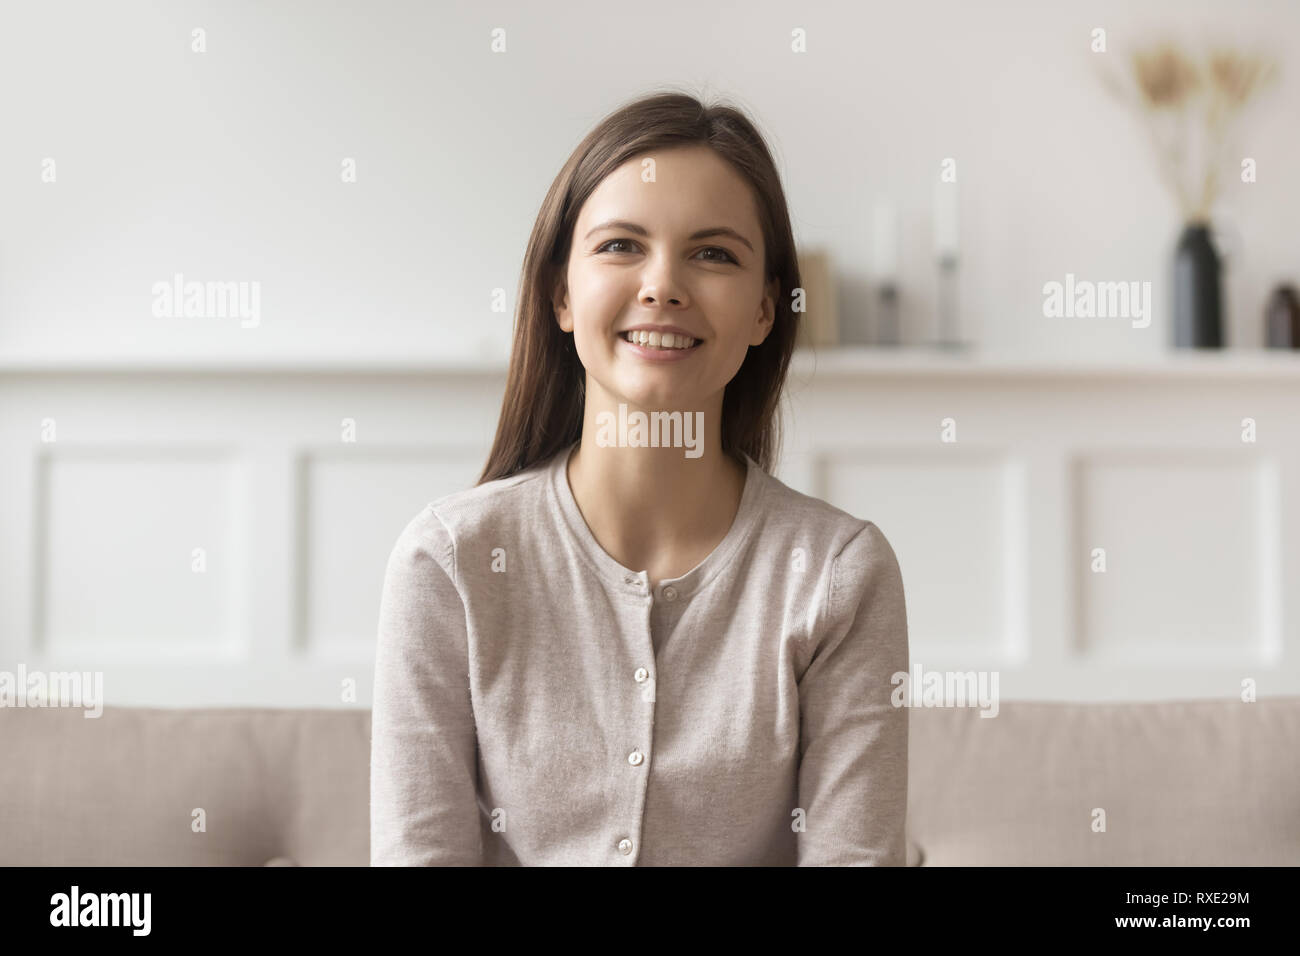 Smiling young casual woman sitting on couch looking at camera Banque D'Images